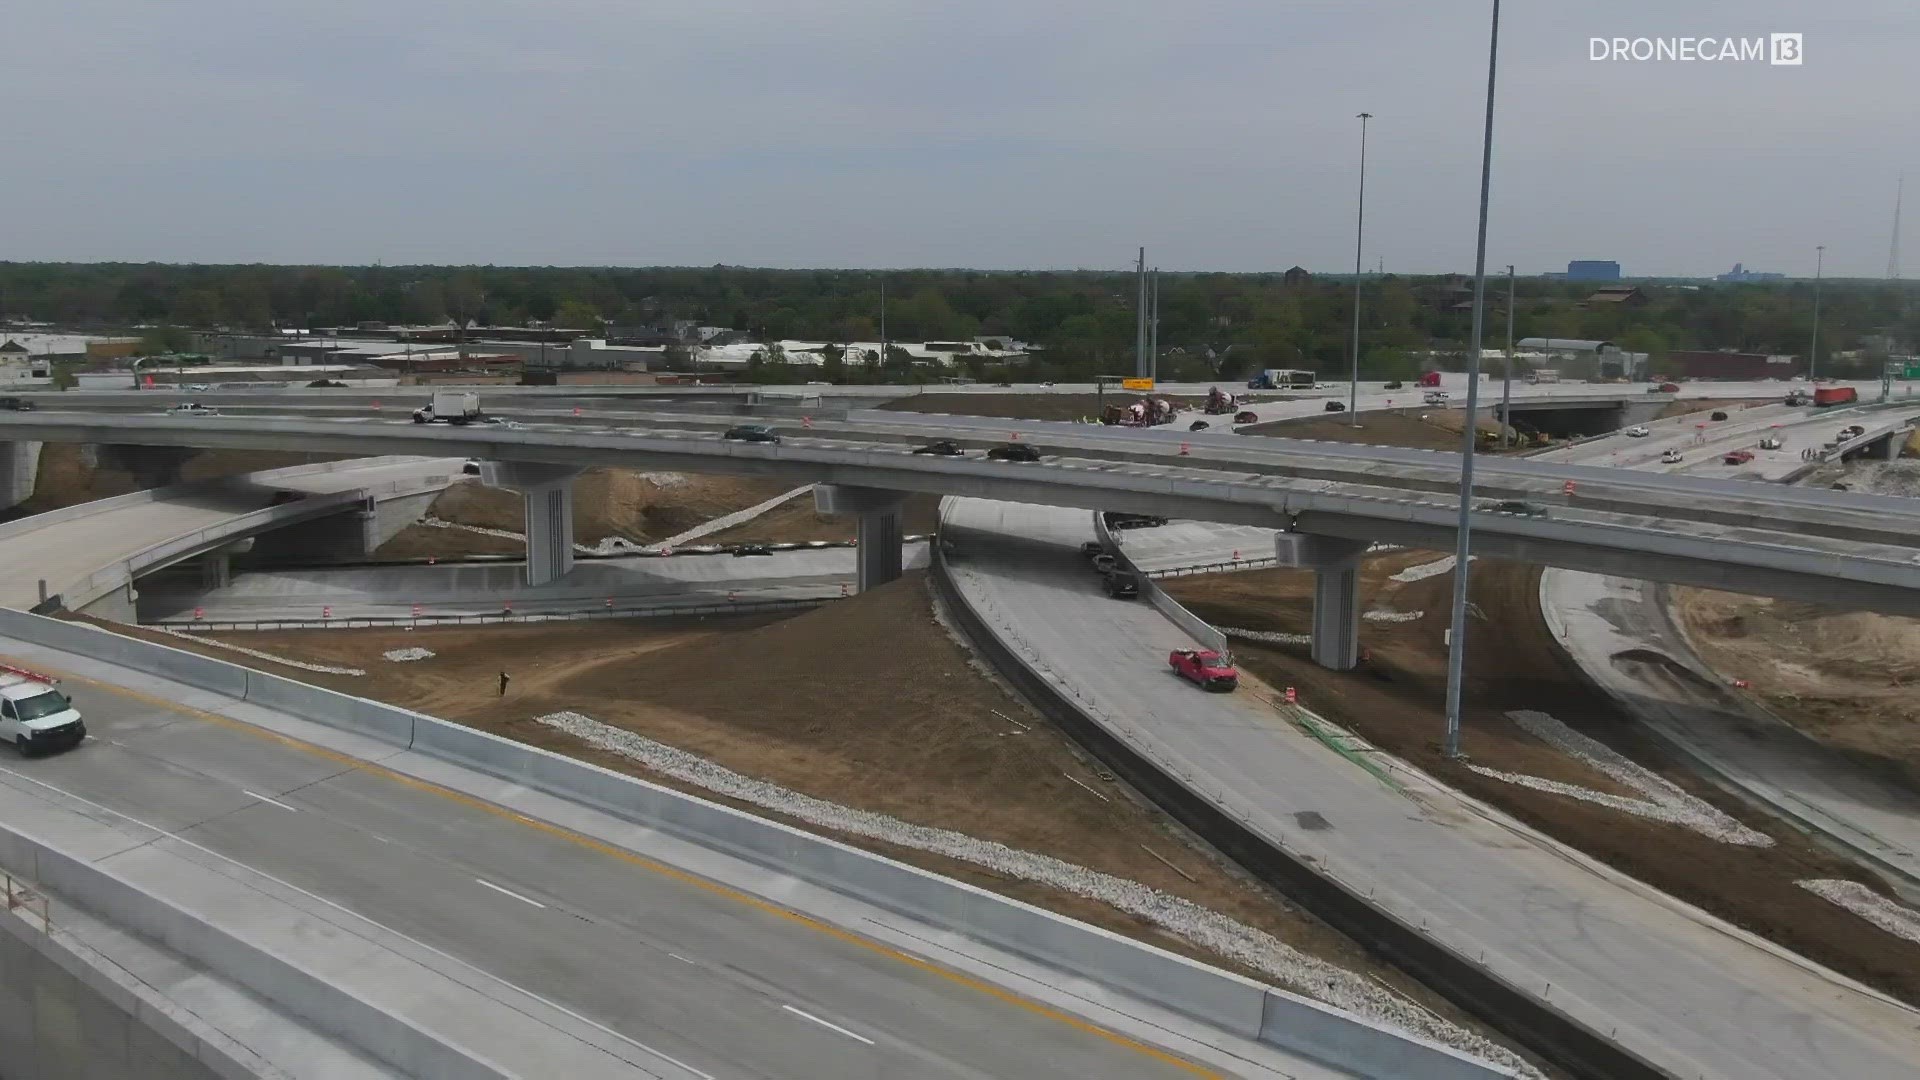 Once all lanes and ramps are open, drivers will be able to travel along I-65 through the North Split interchange from both directions.